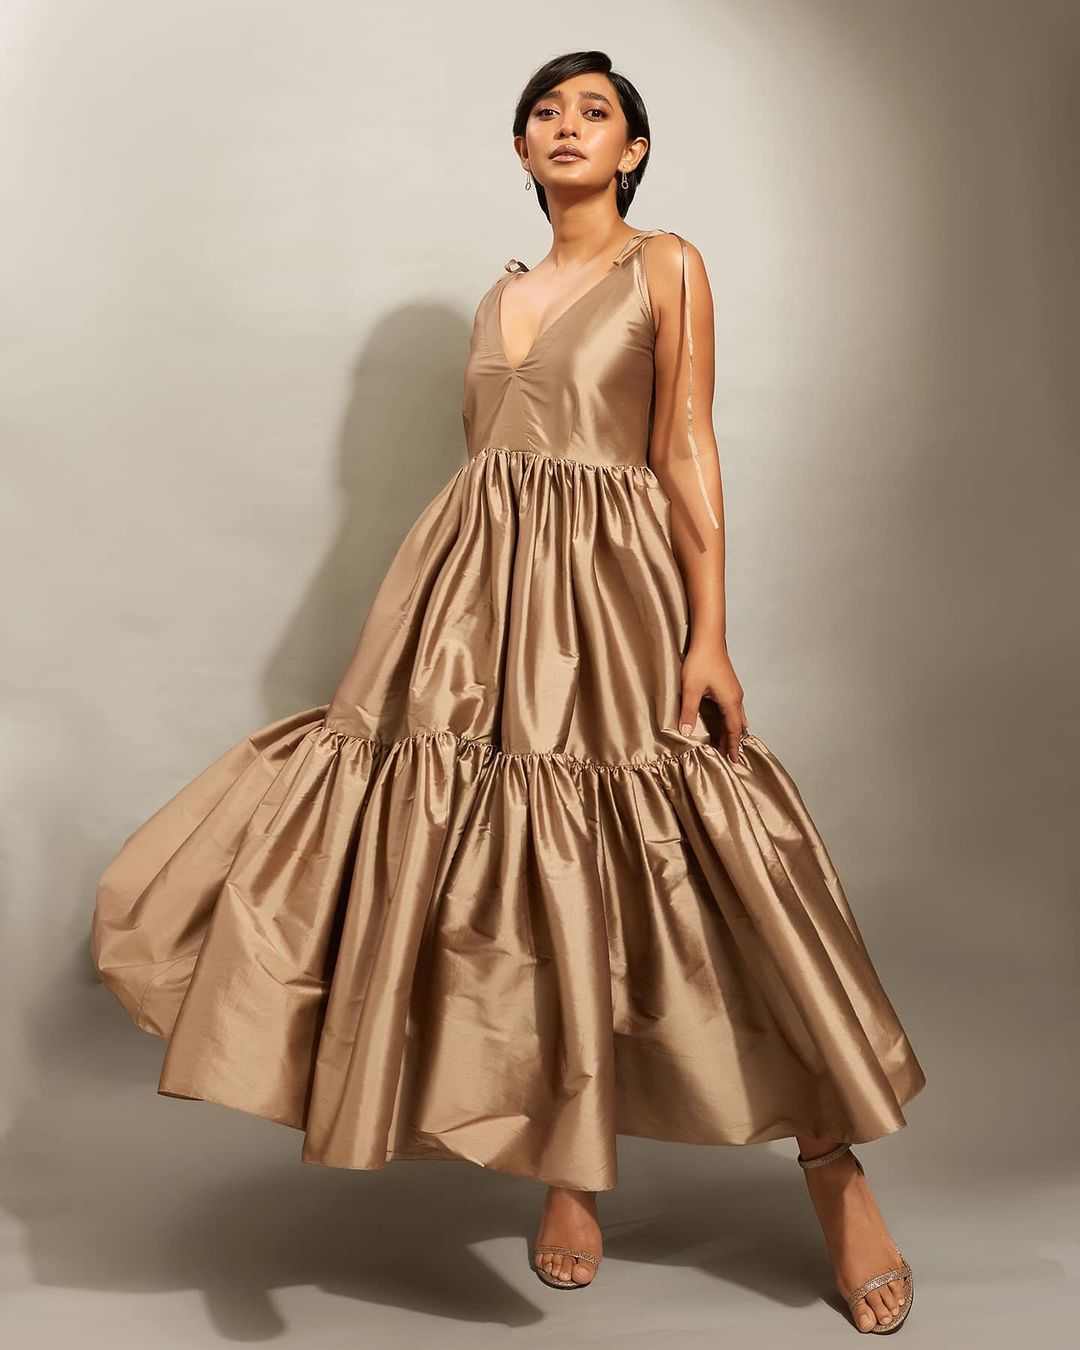 Sayani Satin Ruffle Dress is Setting New Evening Party Outfit Trend